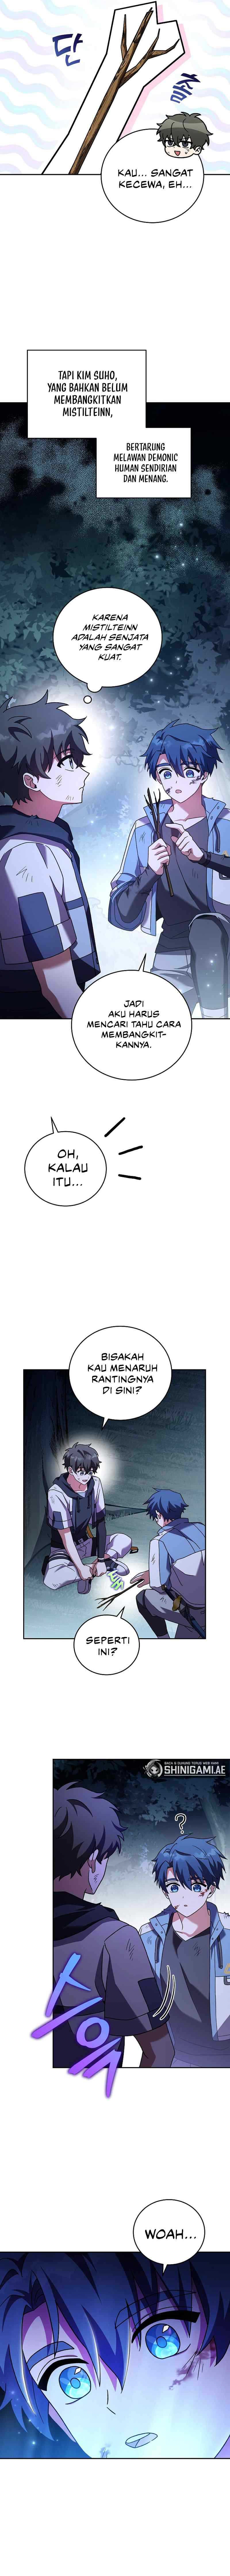 The Novel’s Extra (Remake) Chapter 83